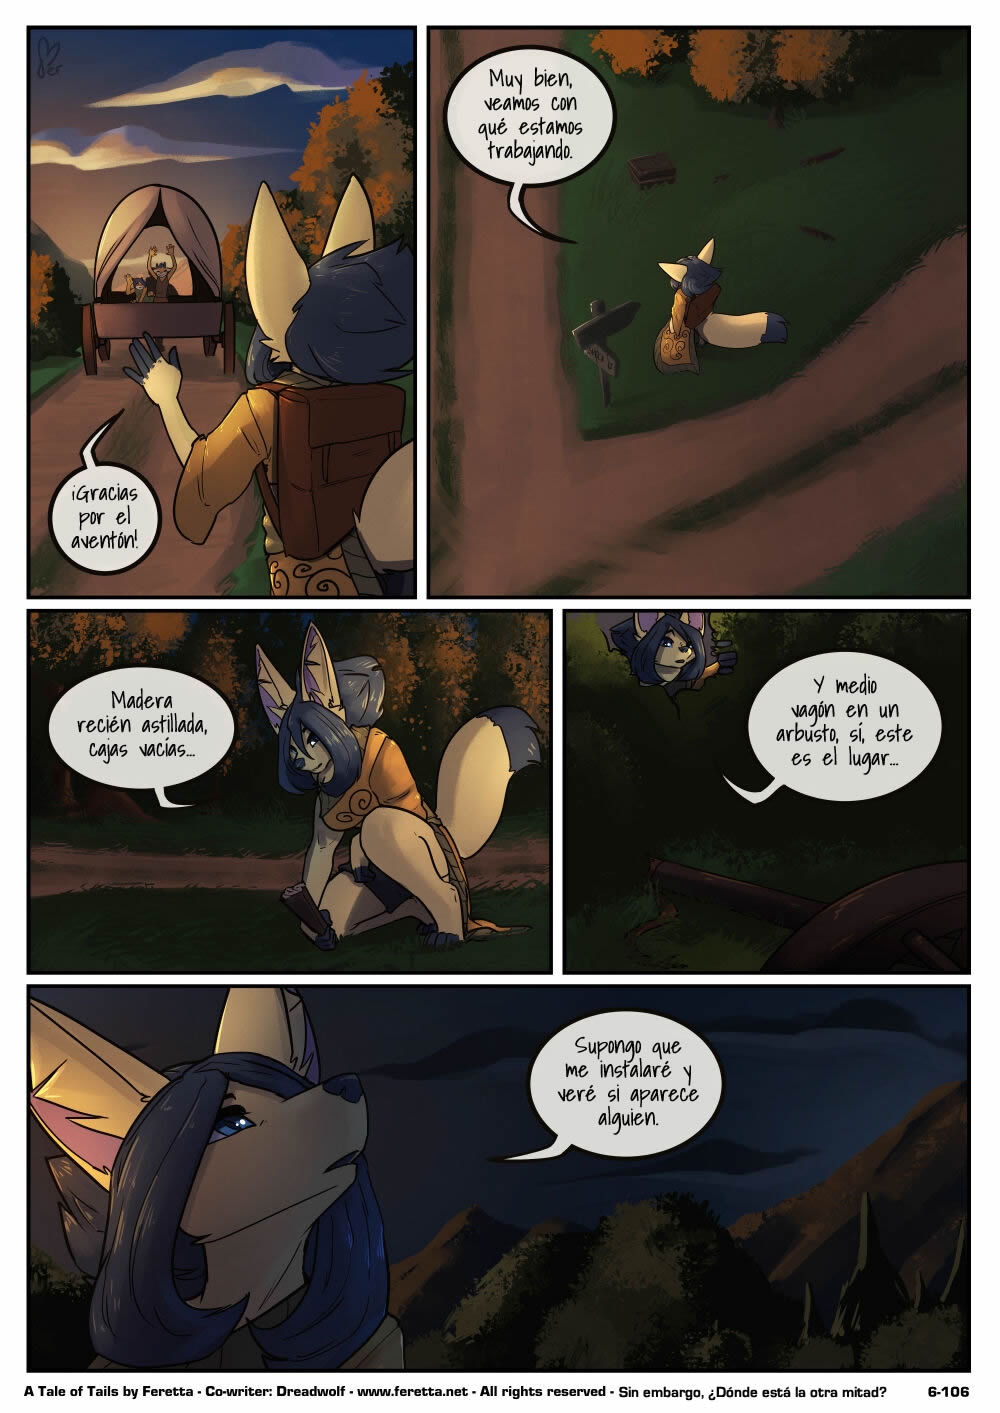 [Feretta] A Tale of Tails: Chapter 6 - Paths converge / Los caminos convergen [Spanish] [Red Fox Makkan] 106